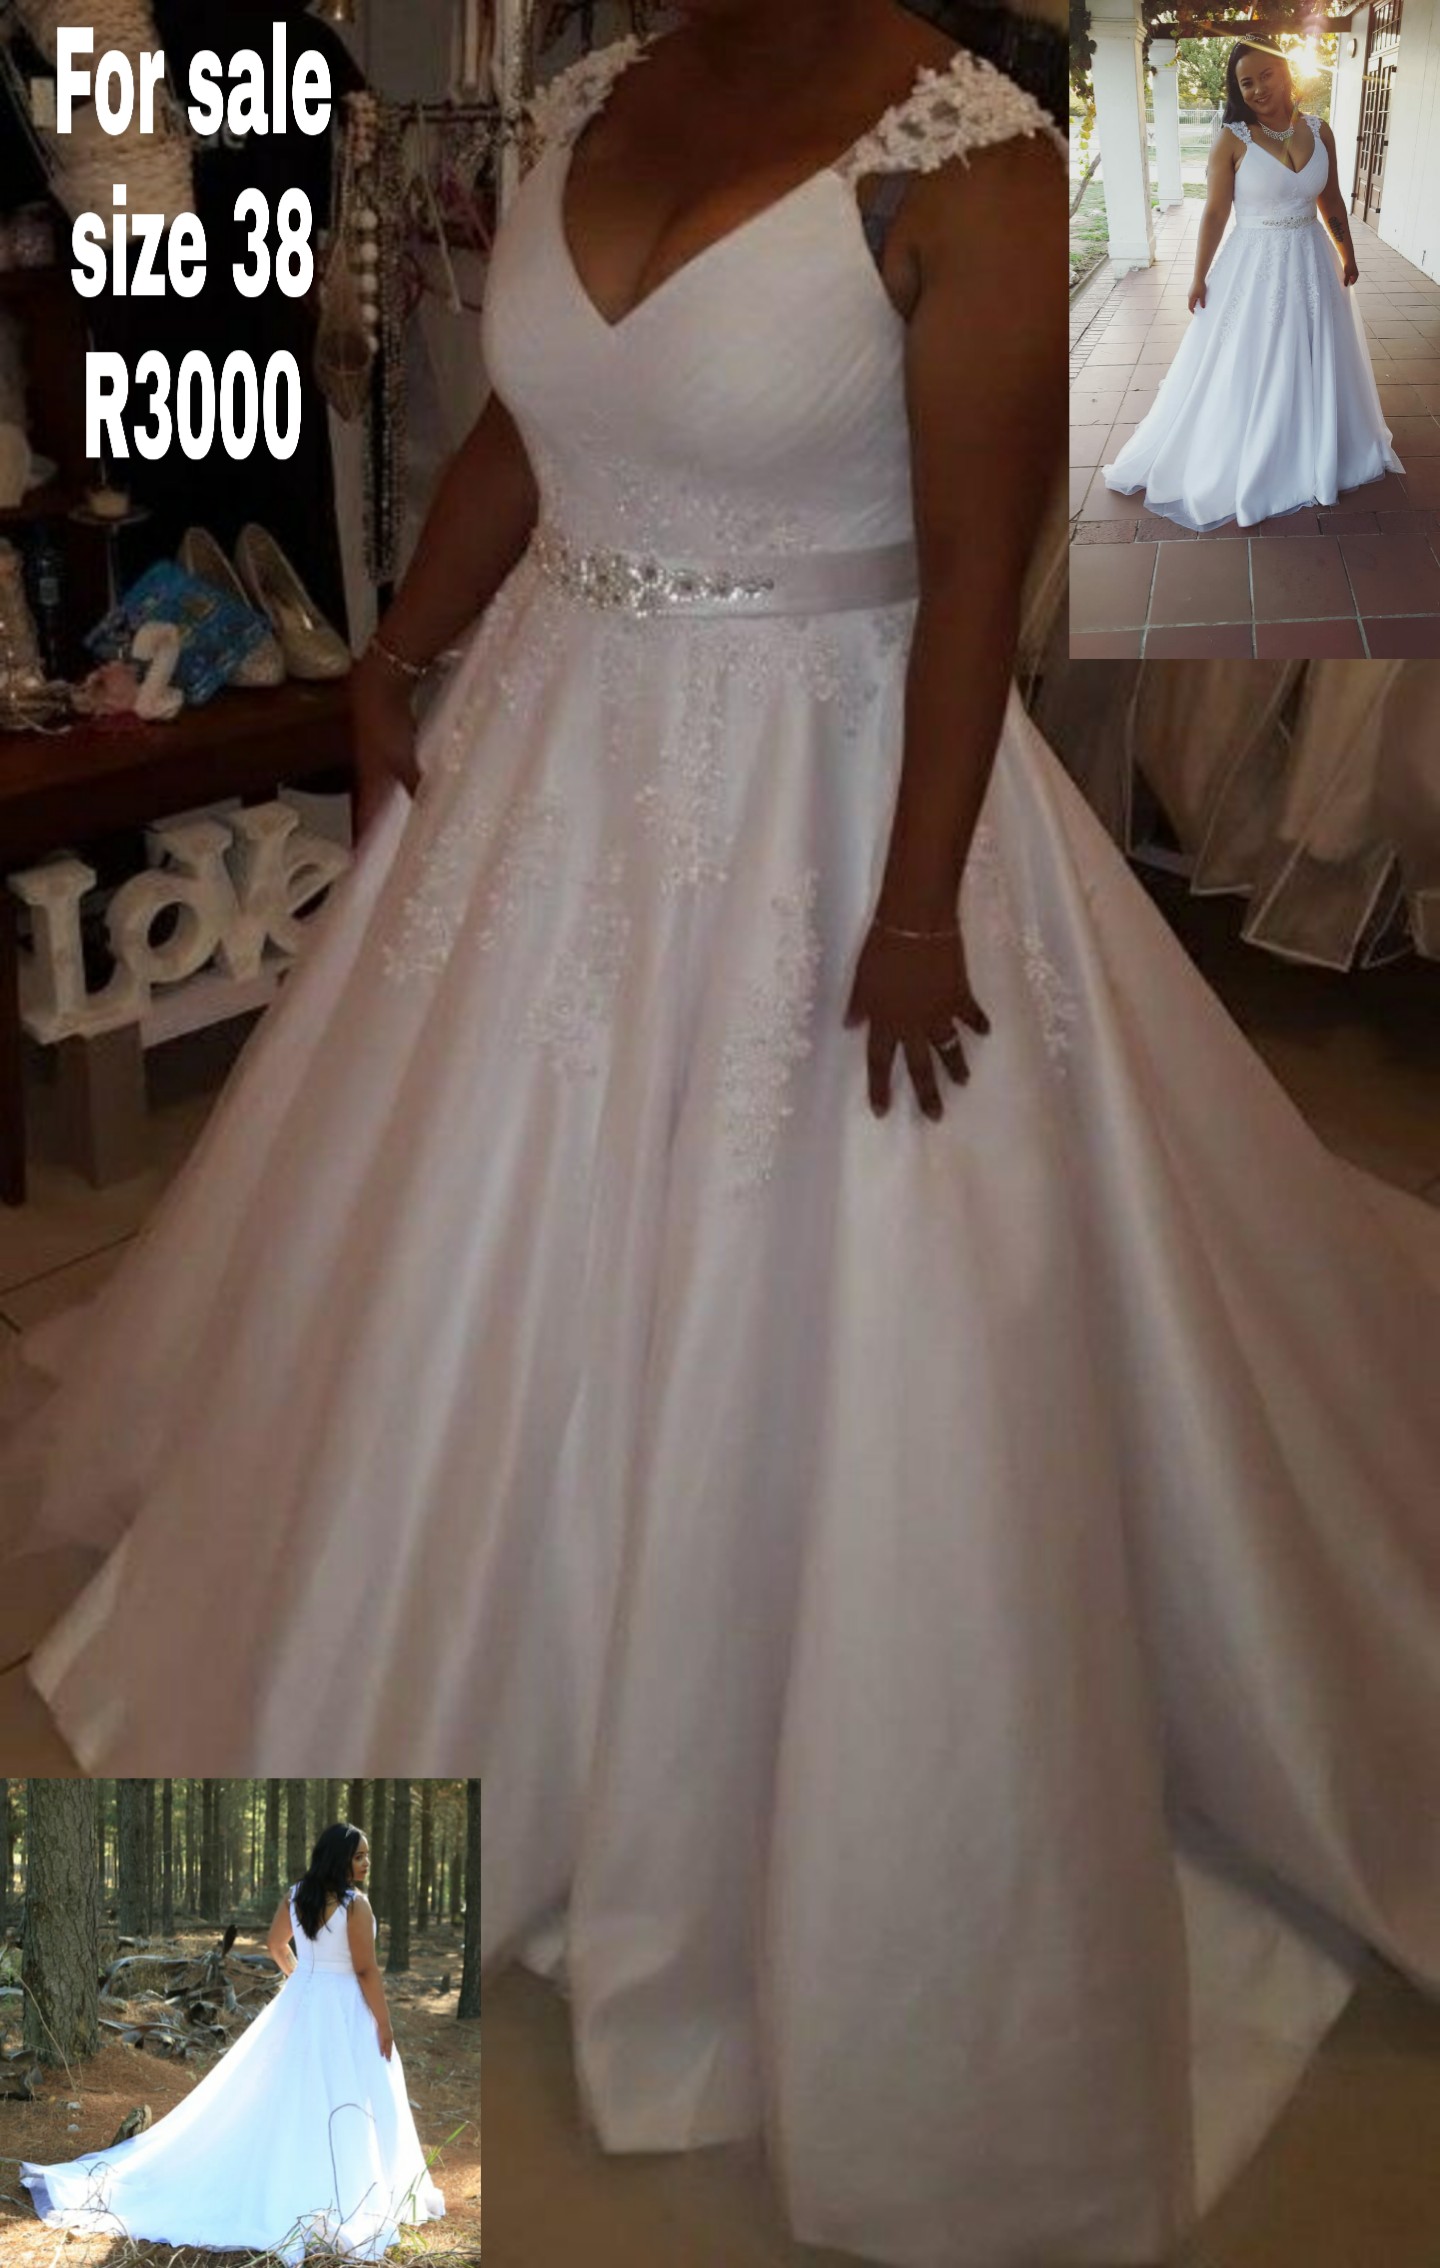  Bridesmaid  Dresses  For Sale  Northern Suburbs Cape  Town  